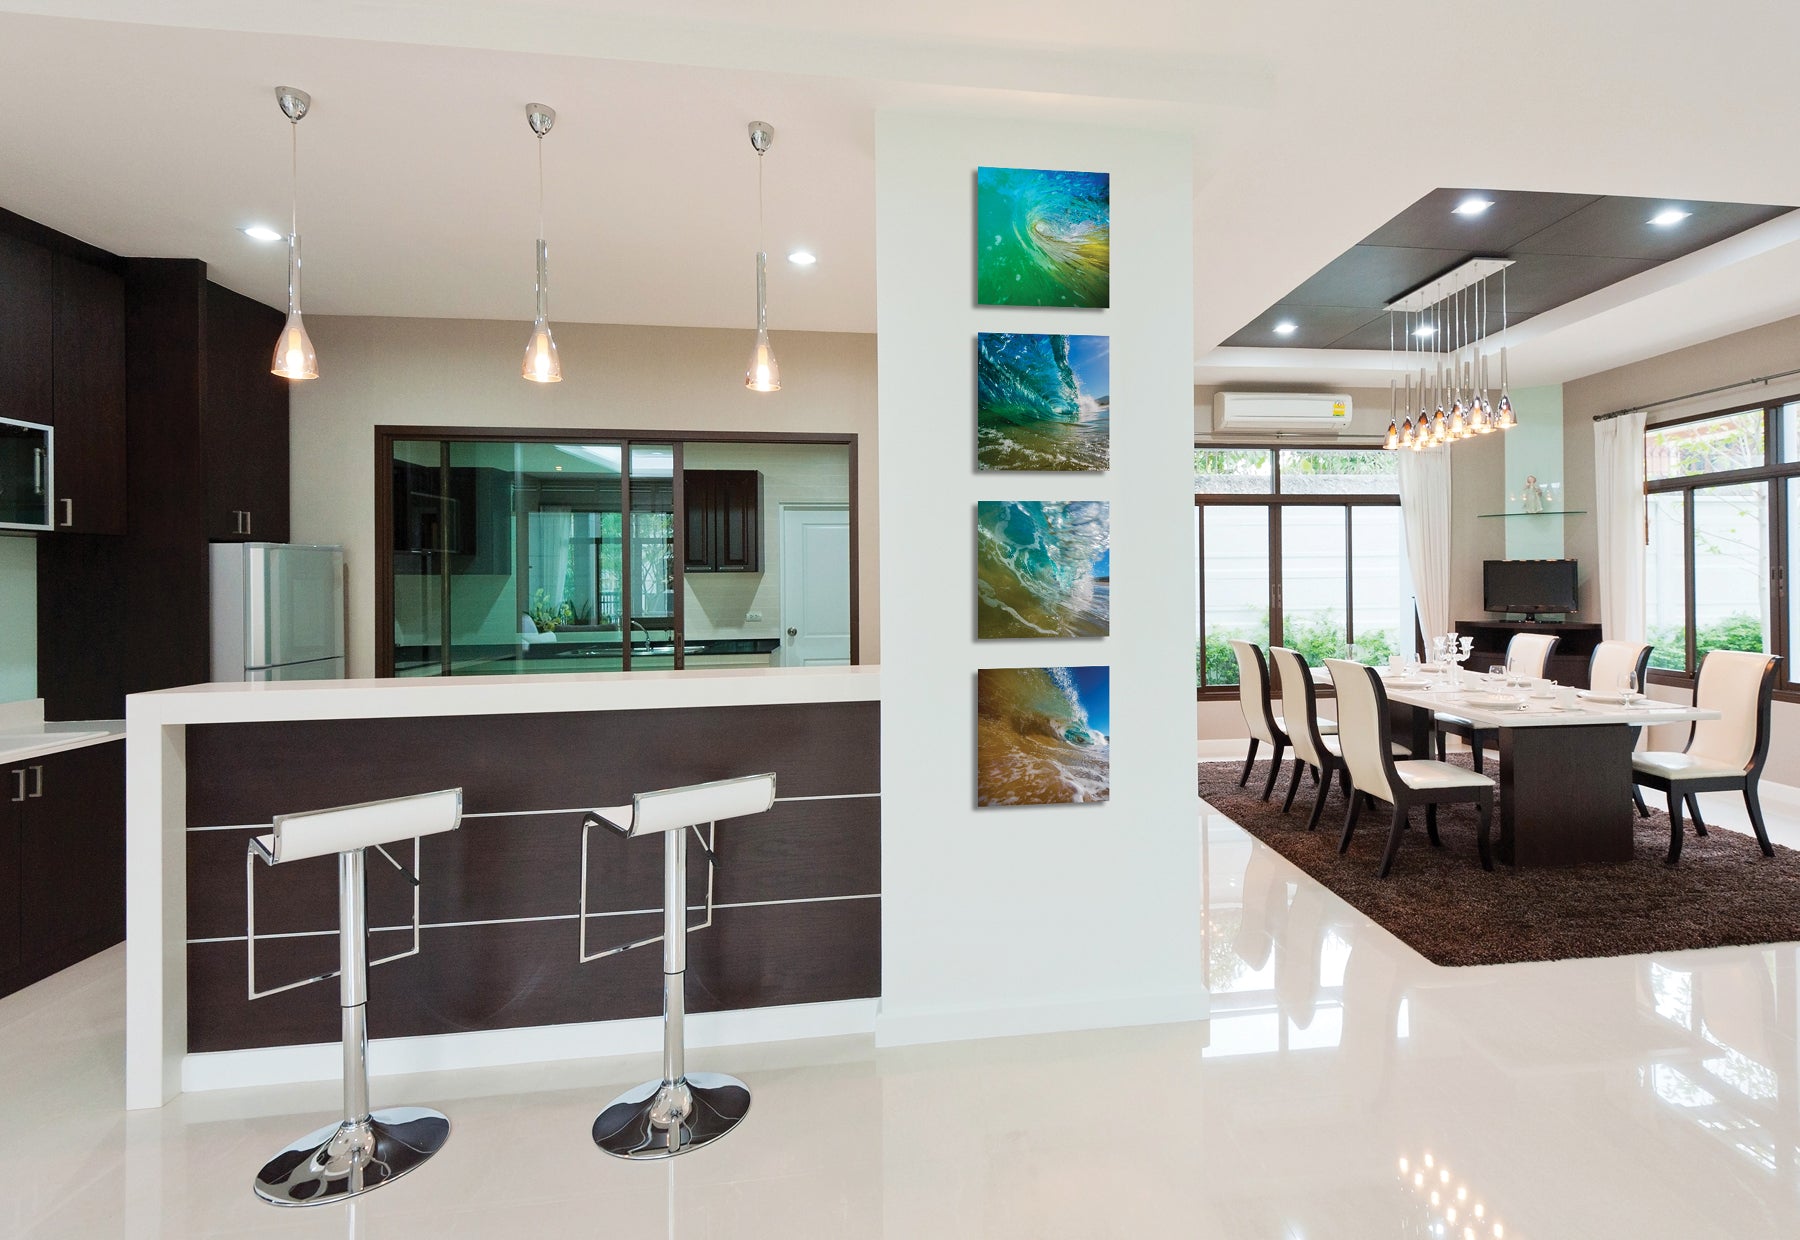 Modern kitchen and dining interior featuring four square photographs of ocean waves by Peter Lik hanging next to bartop